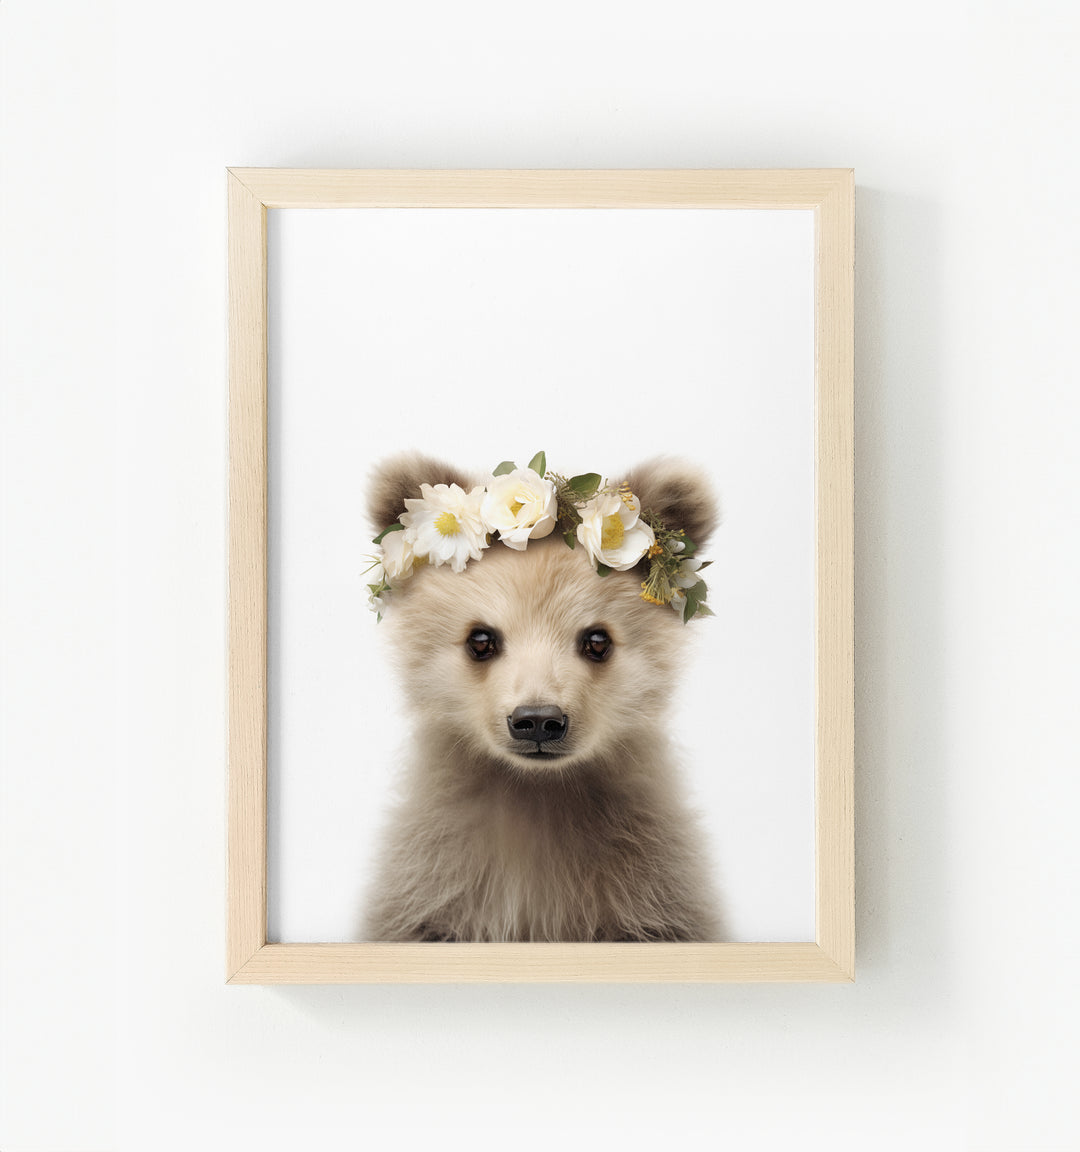 Baby Grizzly Bear Framed Canvas